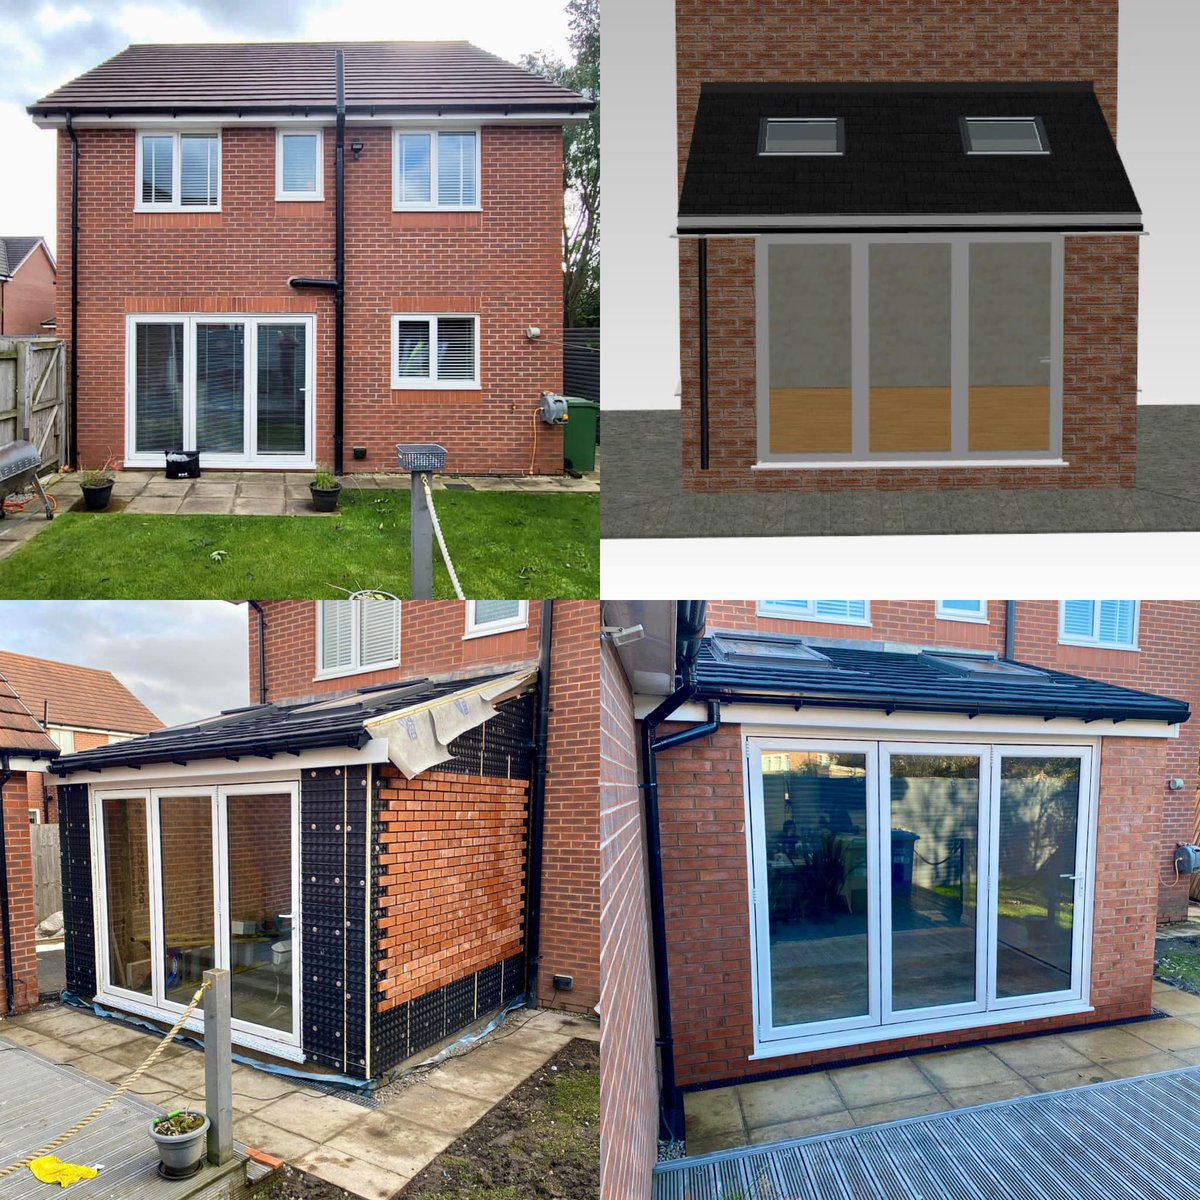 From nothing to this in just weeks ! 😱
Our SIP extensions make extending your home simple! ✅
#extentions #extensionkit #extensionkitz #sip #energyefficient #home #homeinspiration #homeimprovement #dontmoveimprove #newbuild #bespoke #modular #sipkit #insta #homesweethome